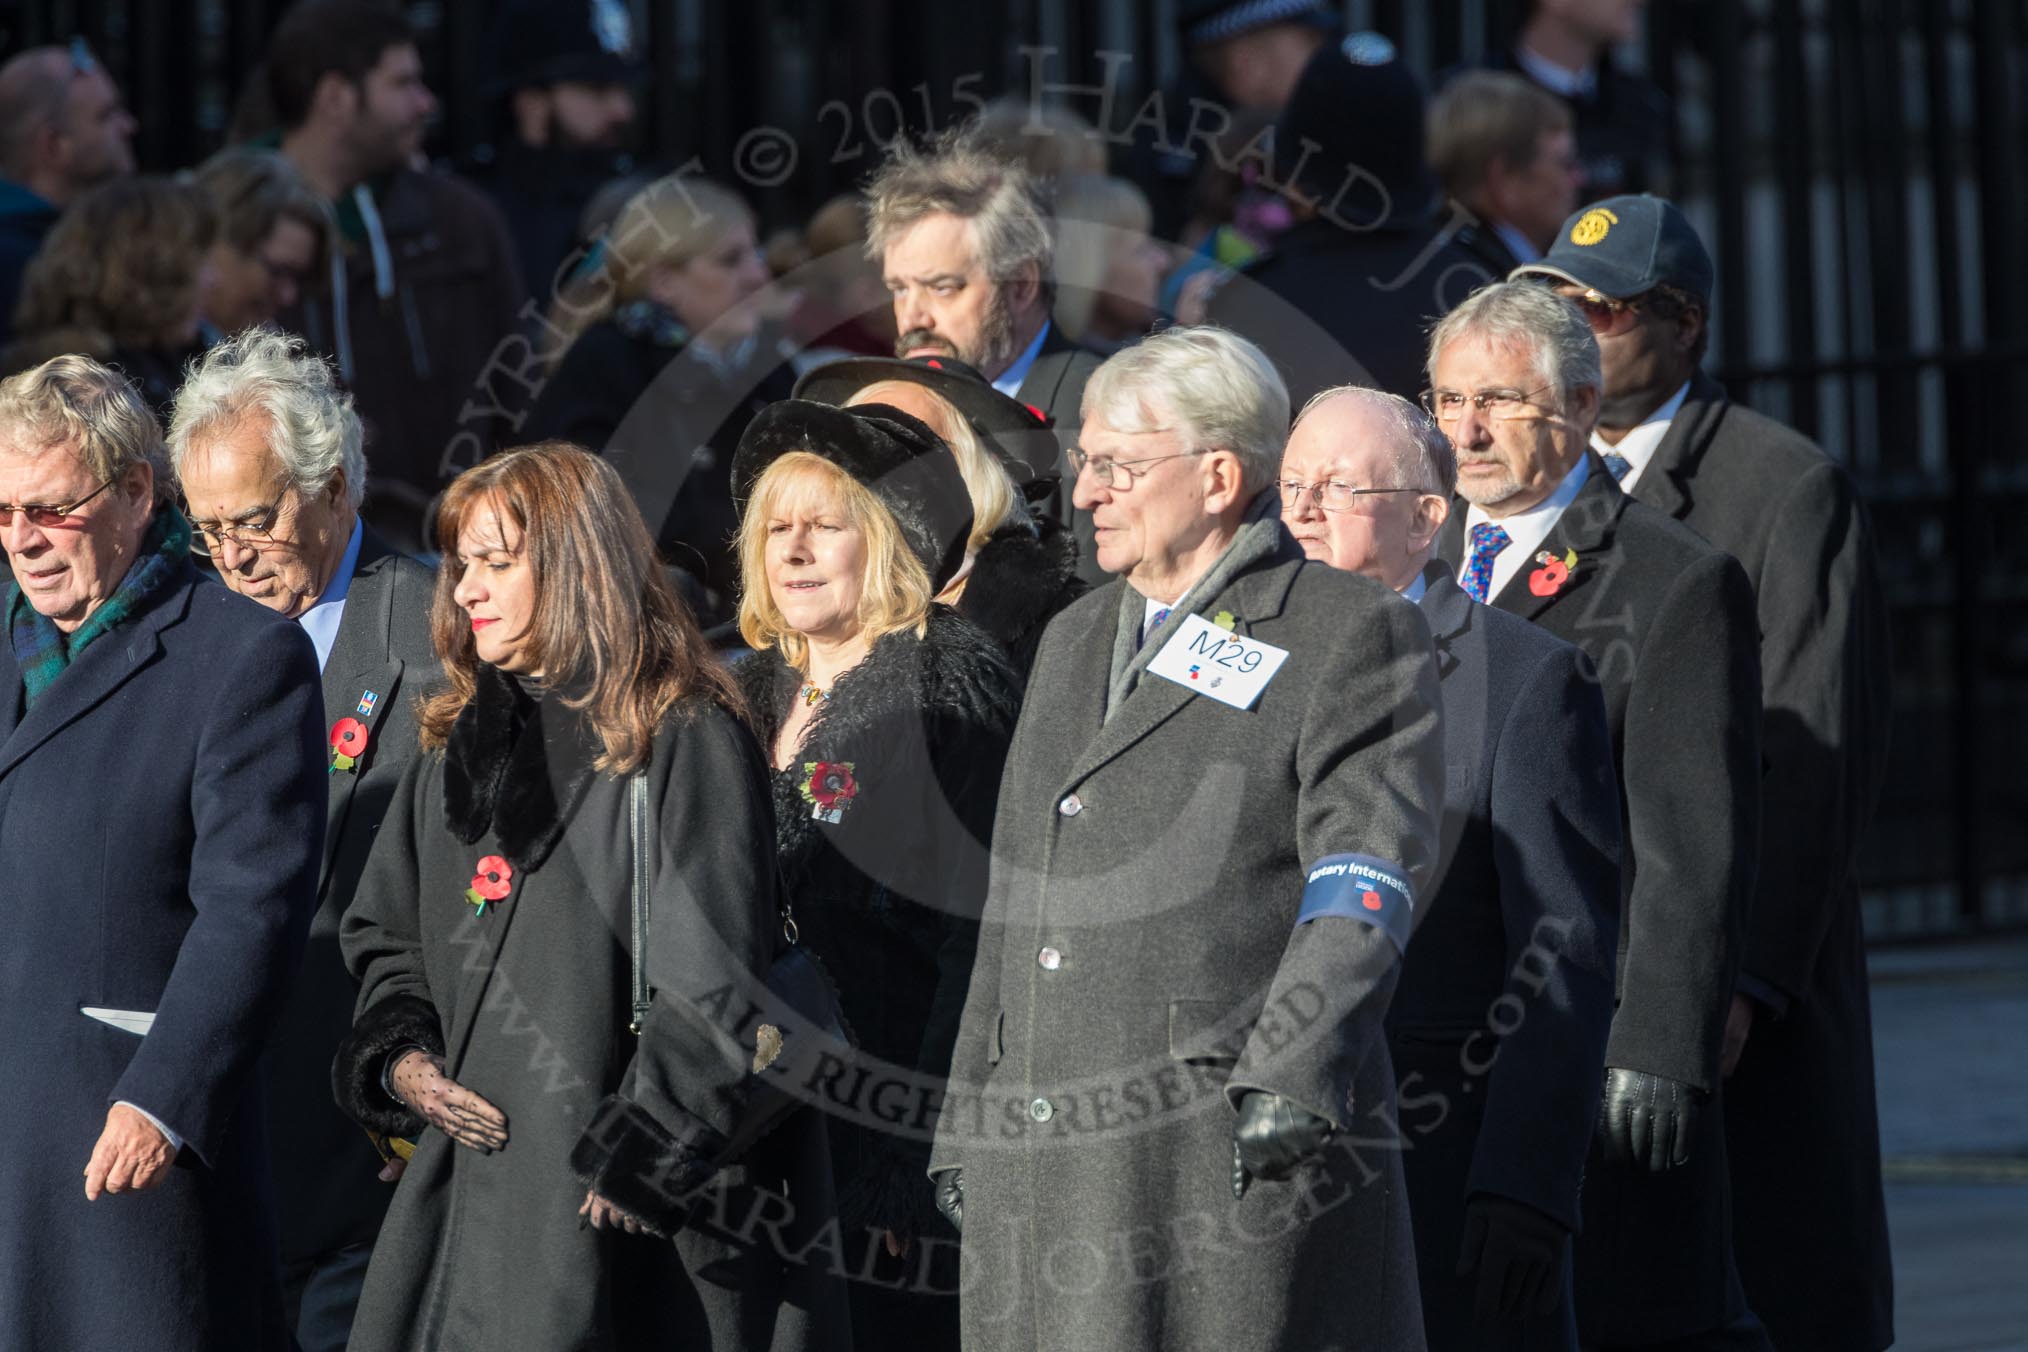 March Past, Remembrance Sunday at the Cenotaph 2016: M29 Rotary International.
Cenotaph, Whitehall, London SW1,
London,
Greater London,
United Kingdom,
on 13 November 2016 at 13:17, image #2755